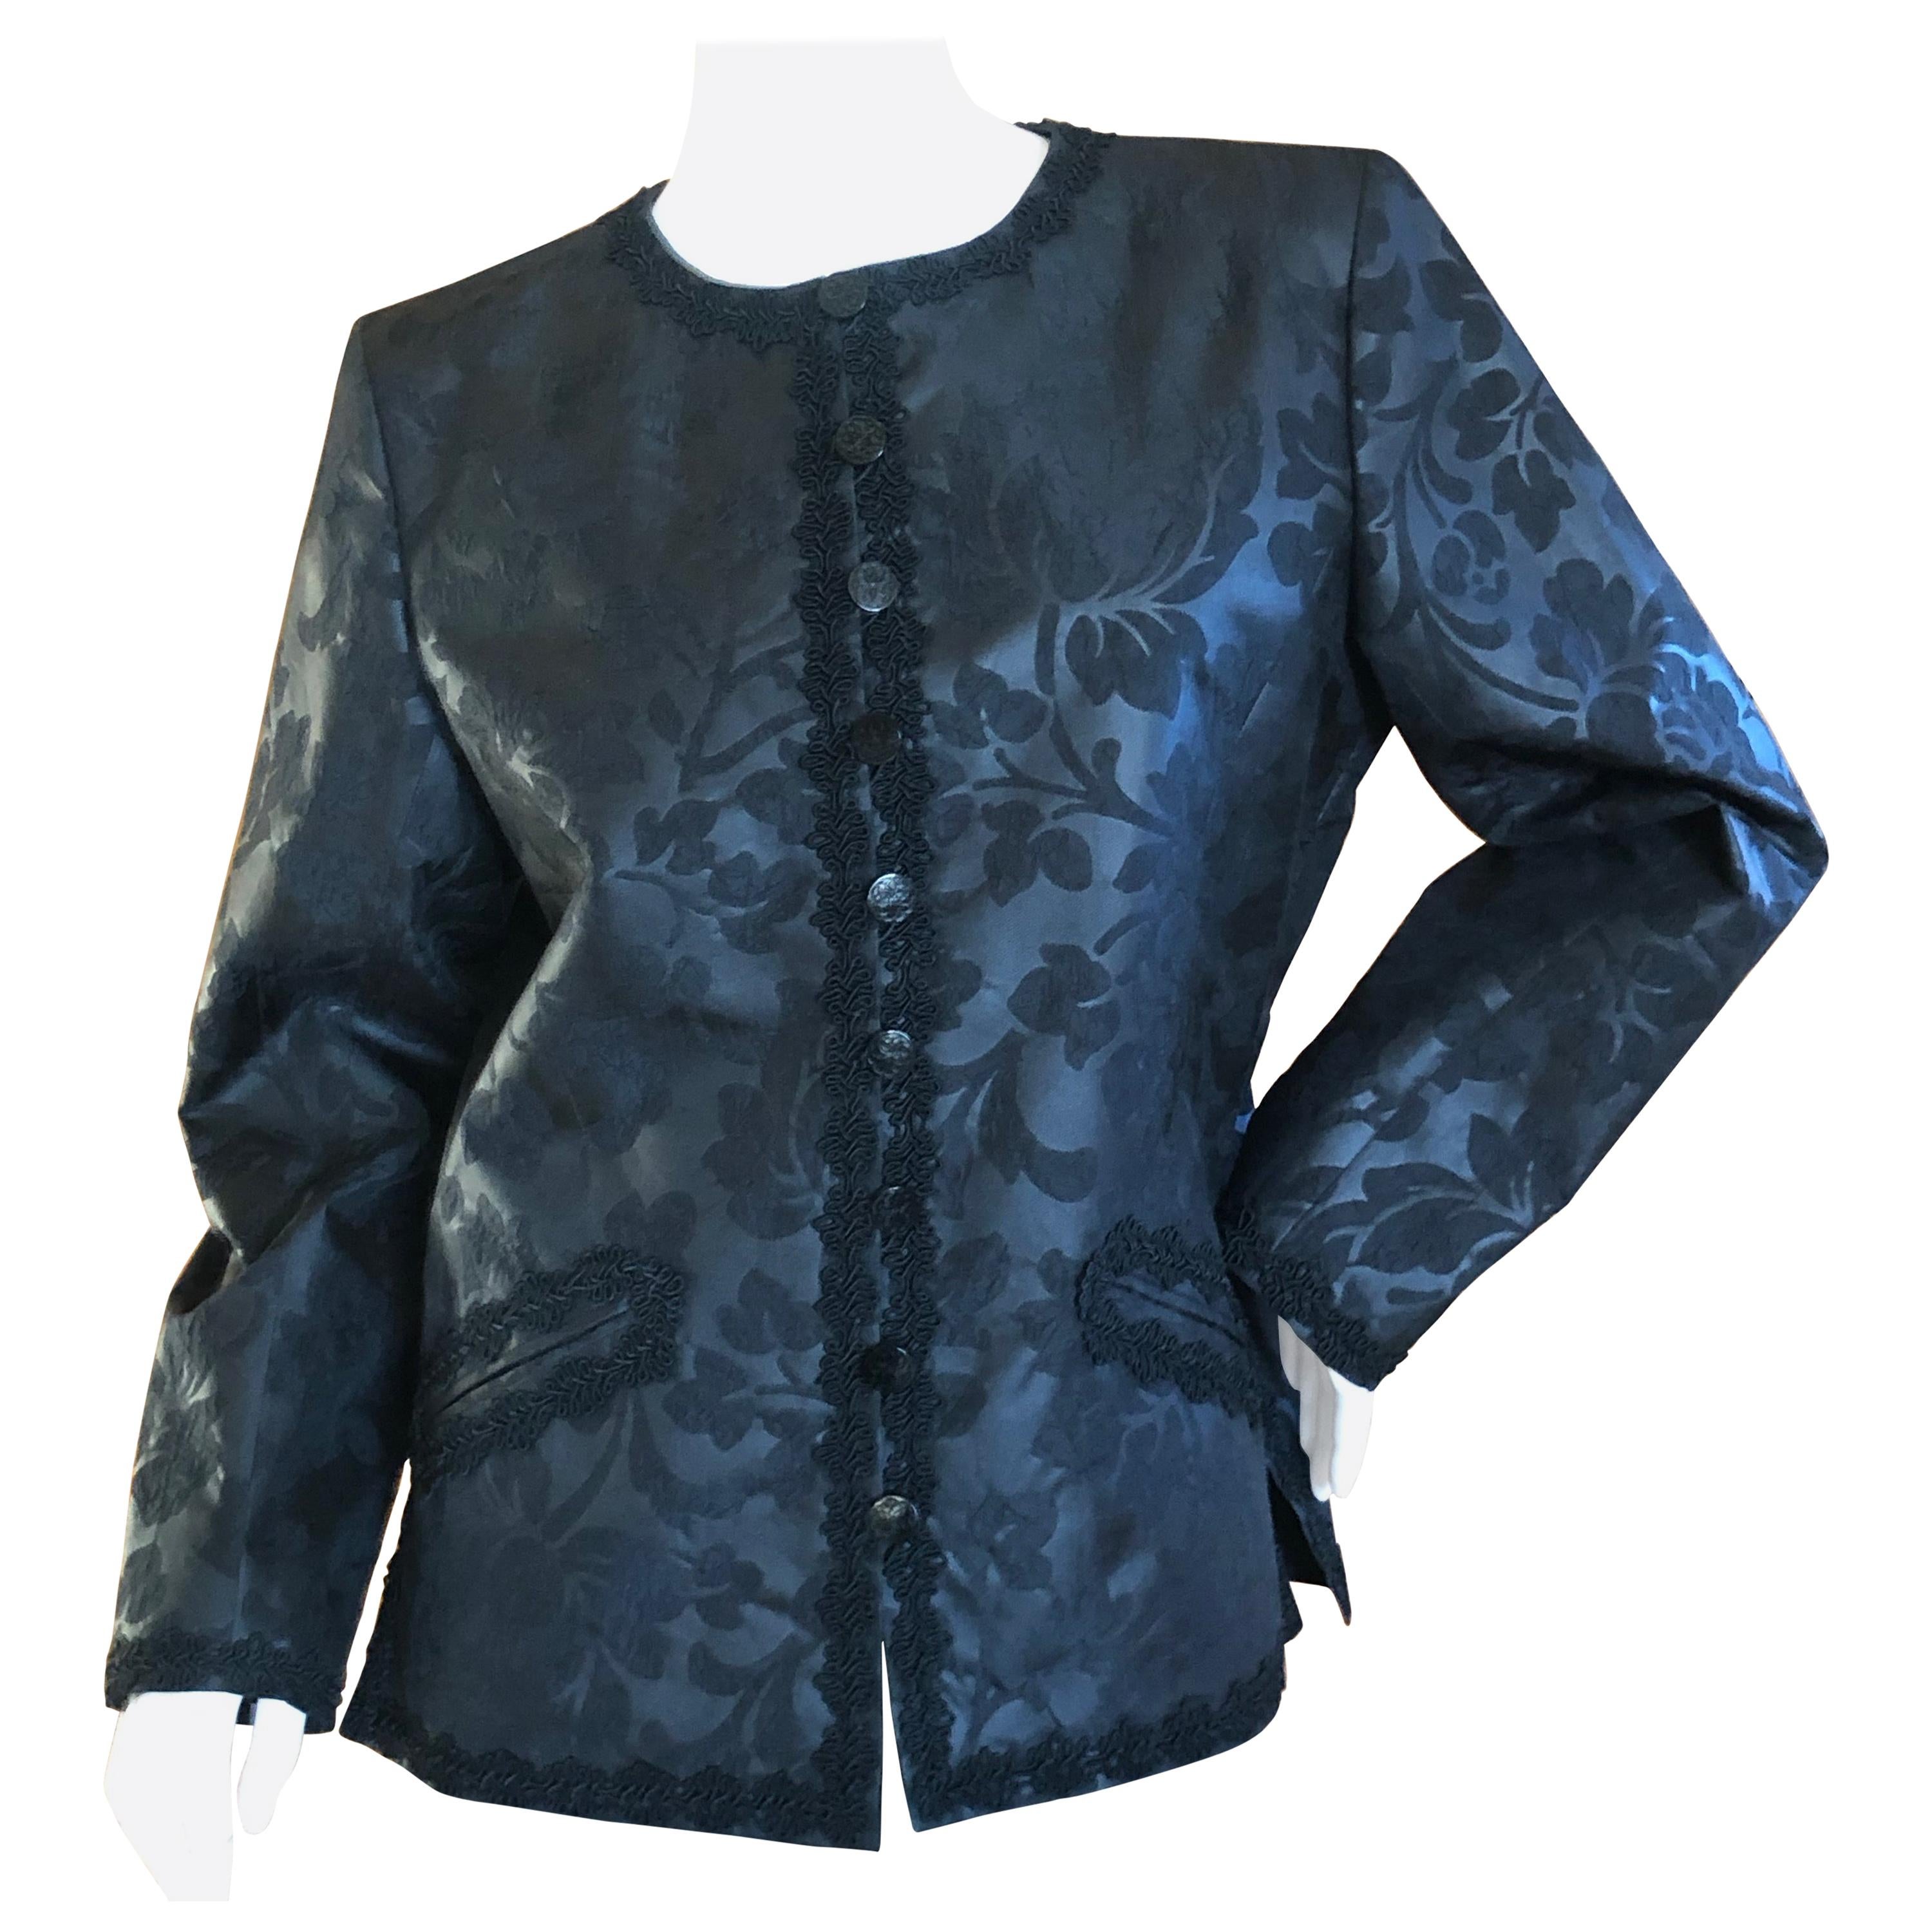 Yves Saint Laurent Vintage 1980's Black Brocade Jacket with Soutache Piping For Sale